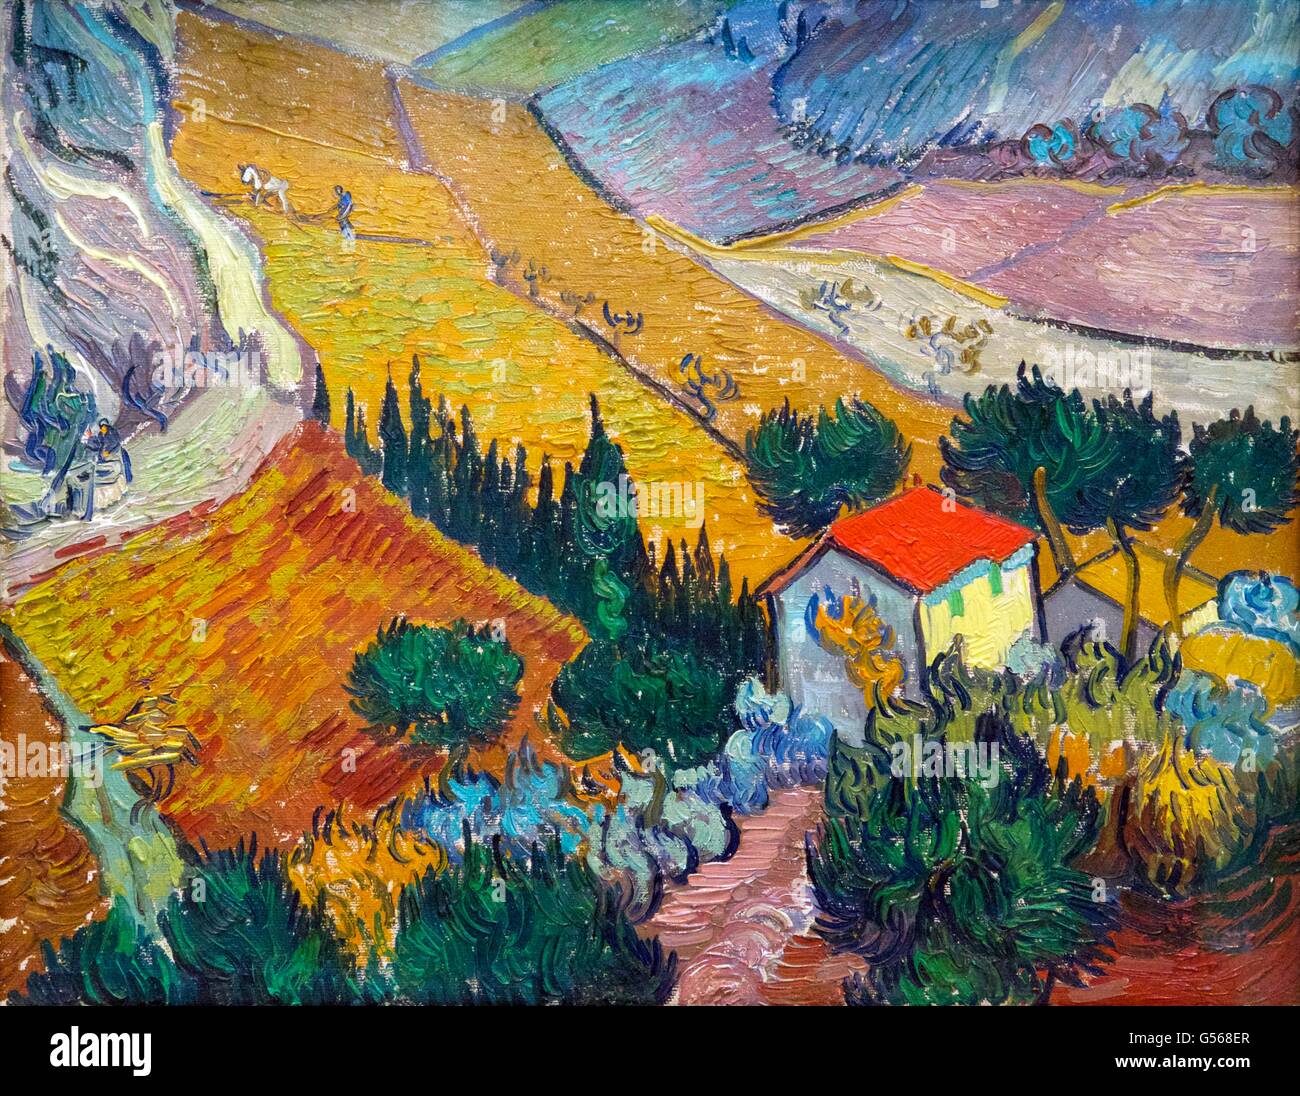 Landscape with House and Ploughman, by Vincent van Gogh, 1889, State Hermitage Museum, Saint Petersburg, Russia Stock Photo